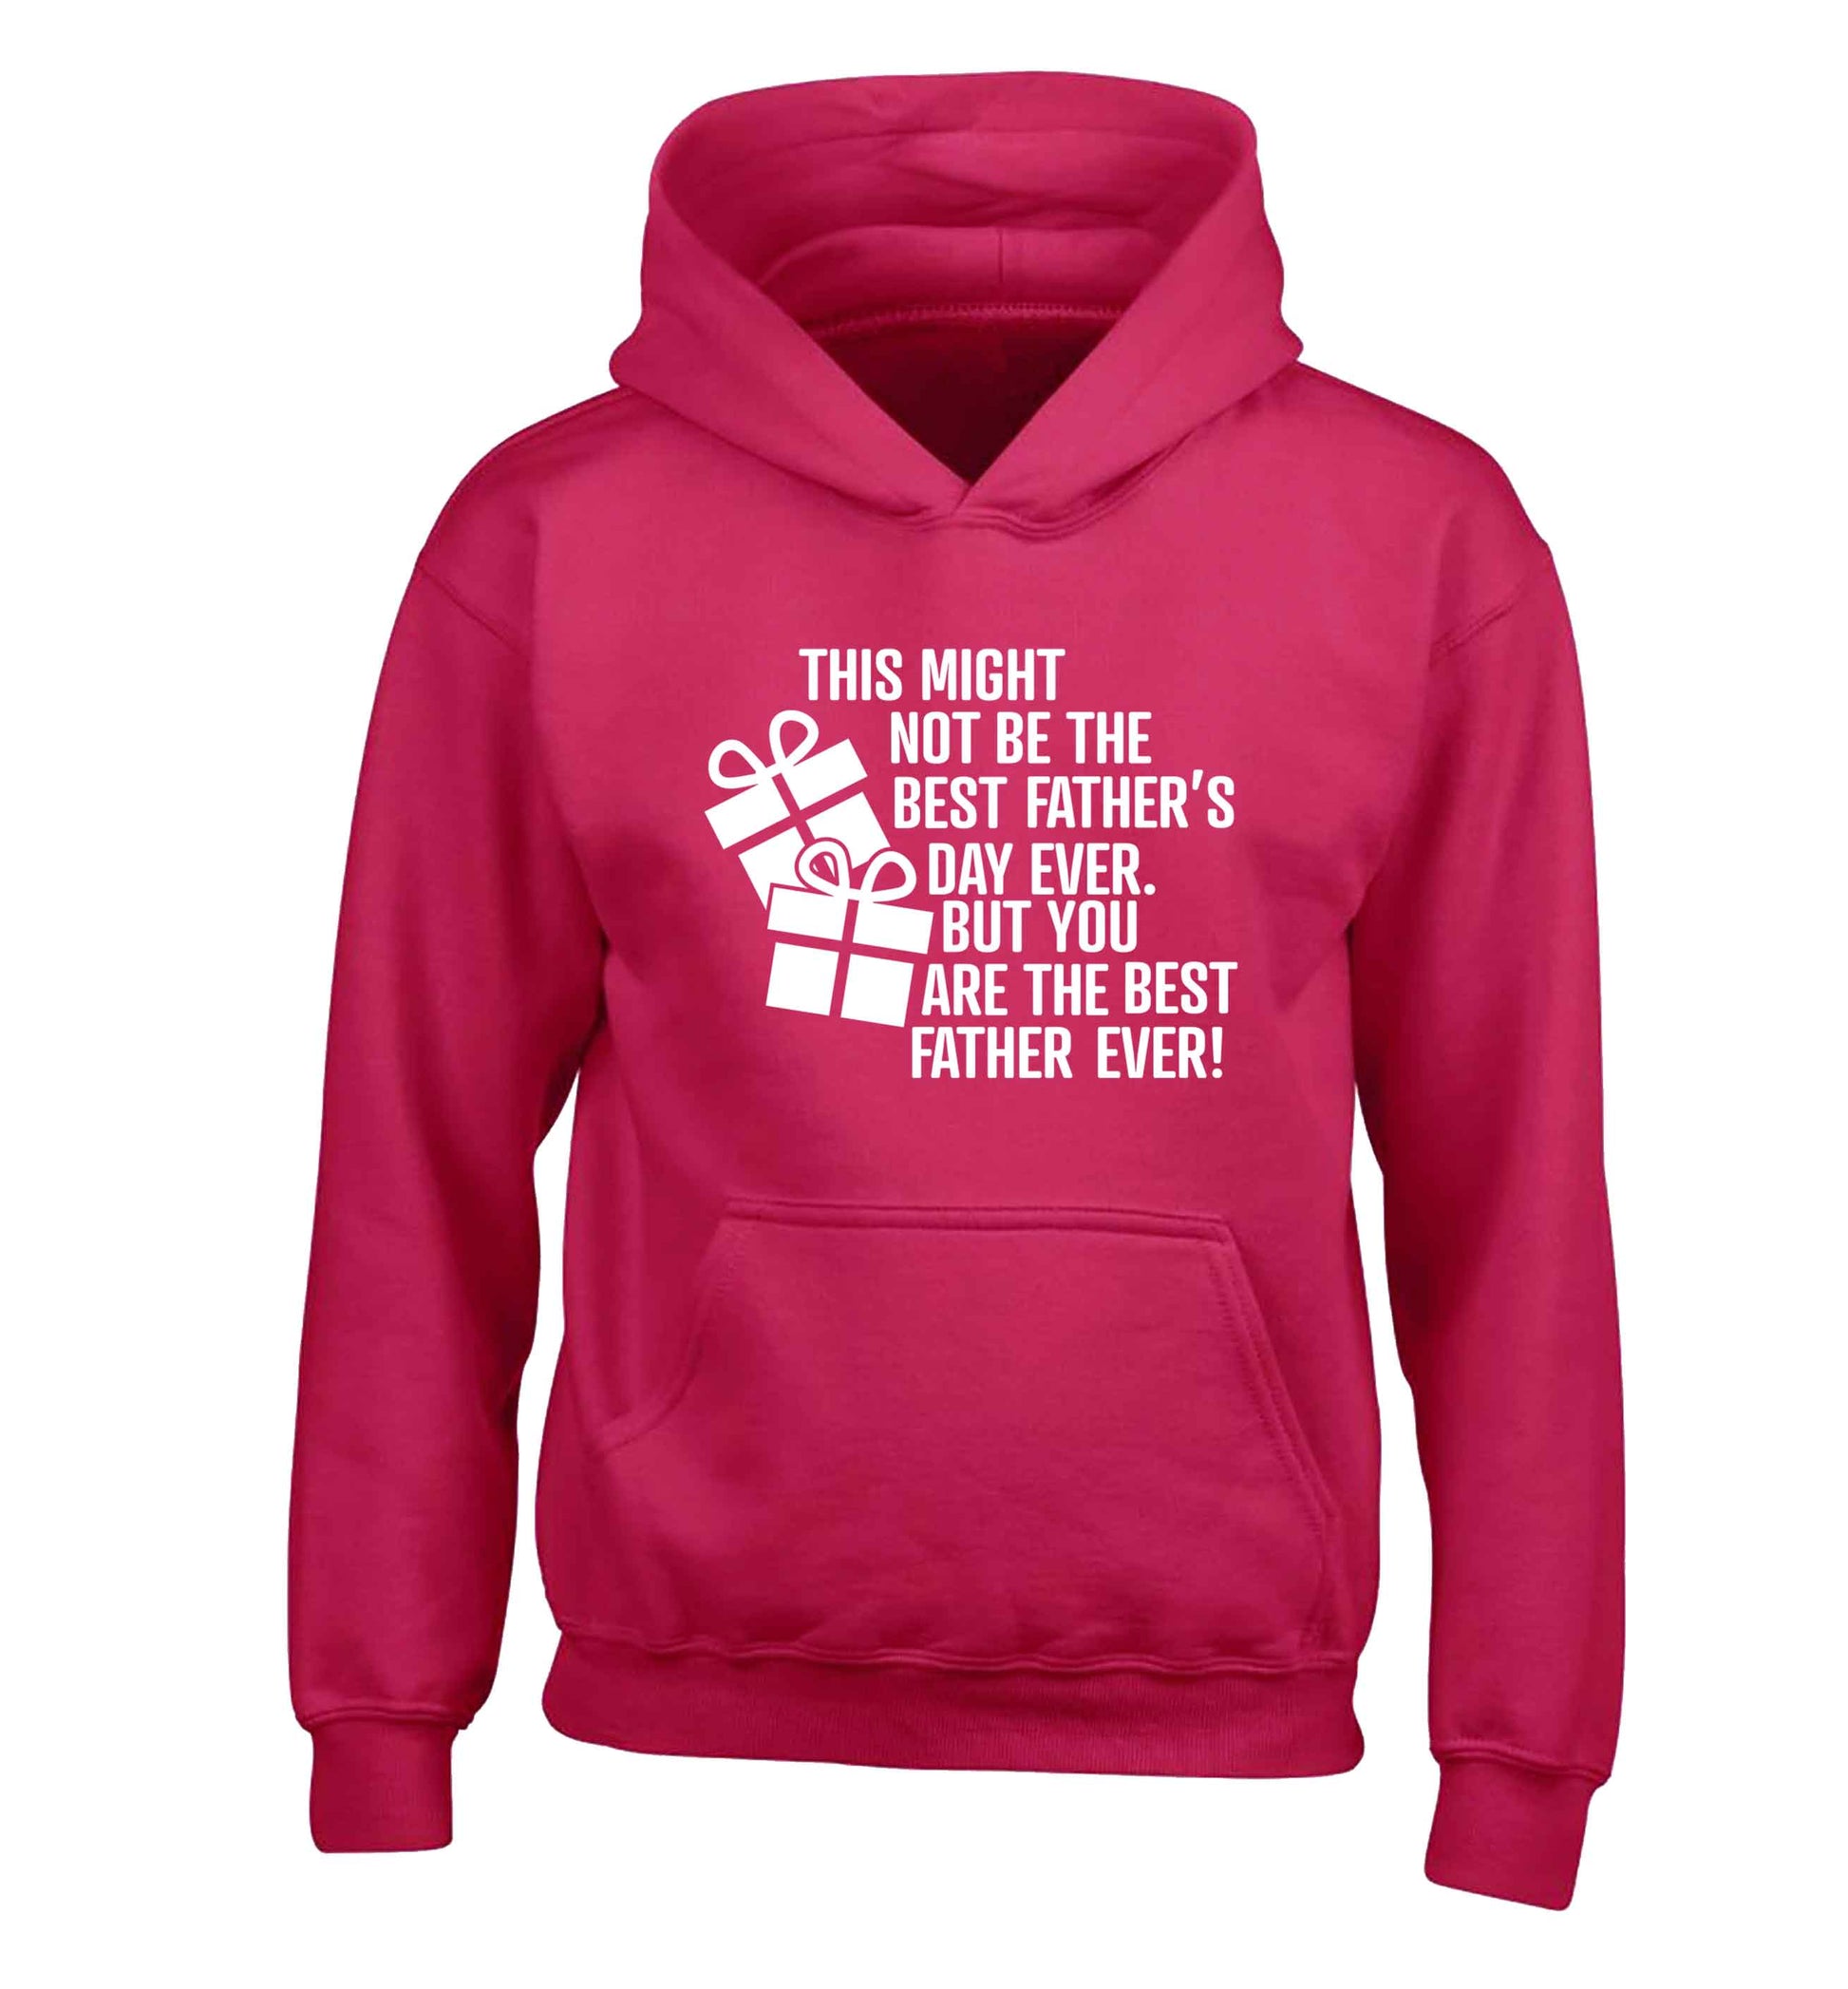 It might not be the best Father's Day ever but you are the best father ever! children's pink hoodie 12-13 Years